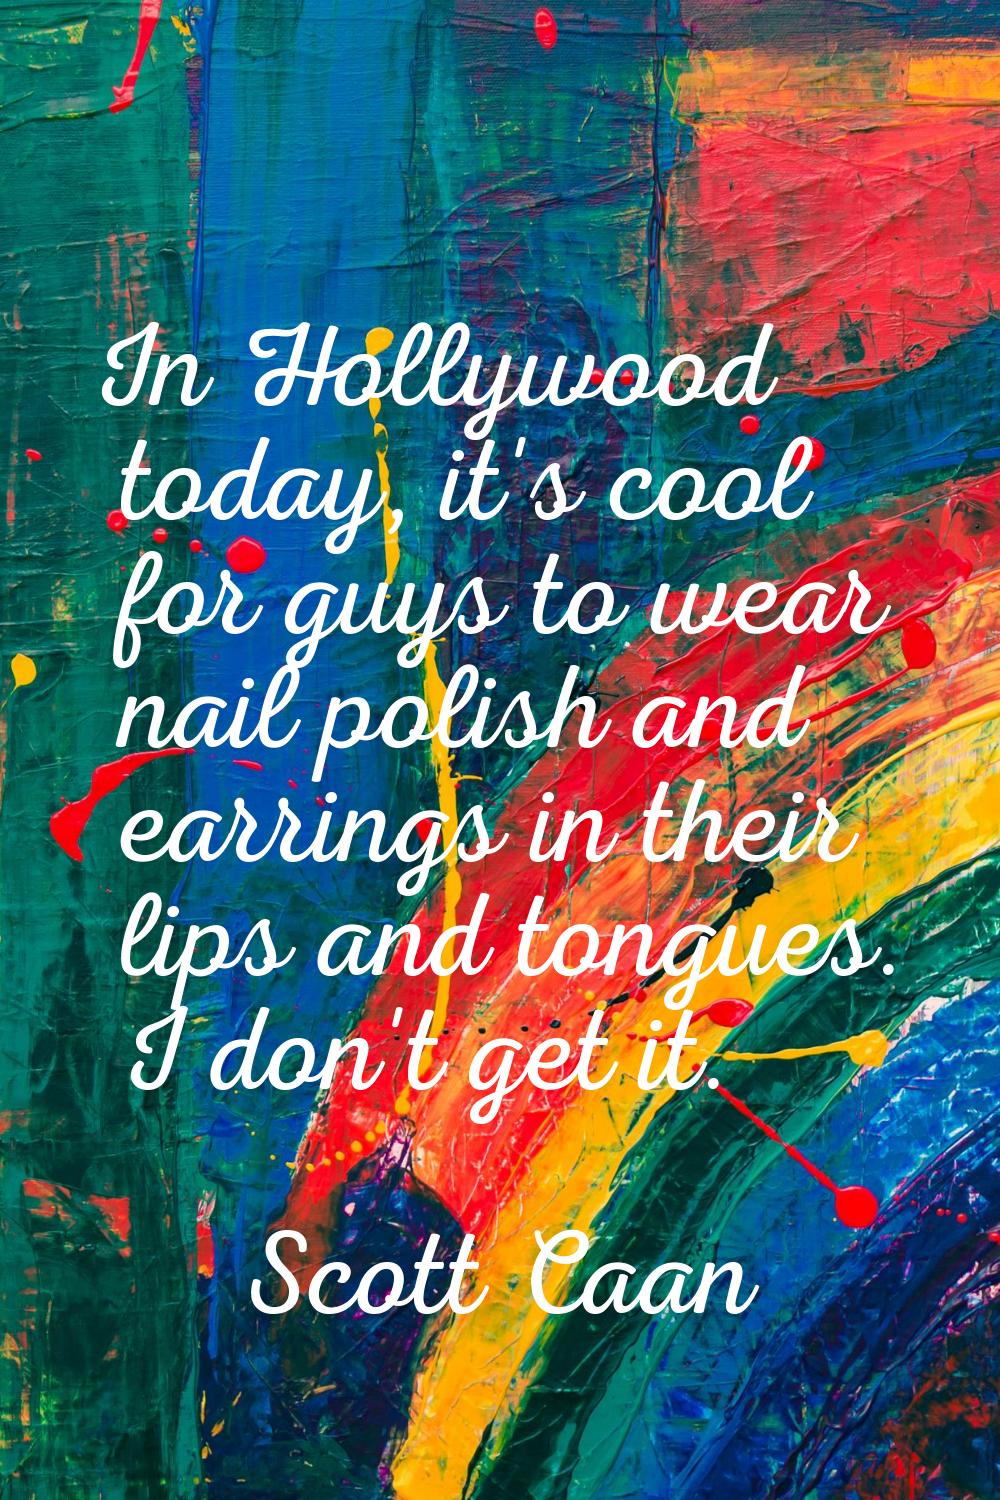 In Hollywood today, it's cool for guys to wear nail polish and earrings in their lips and tongues. 